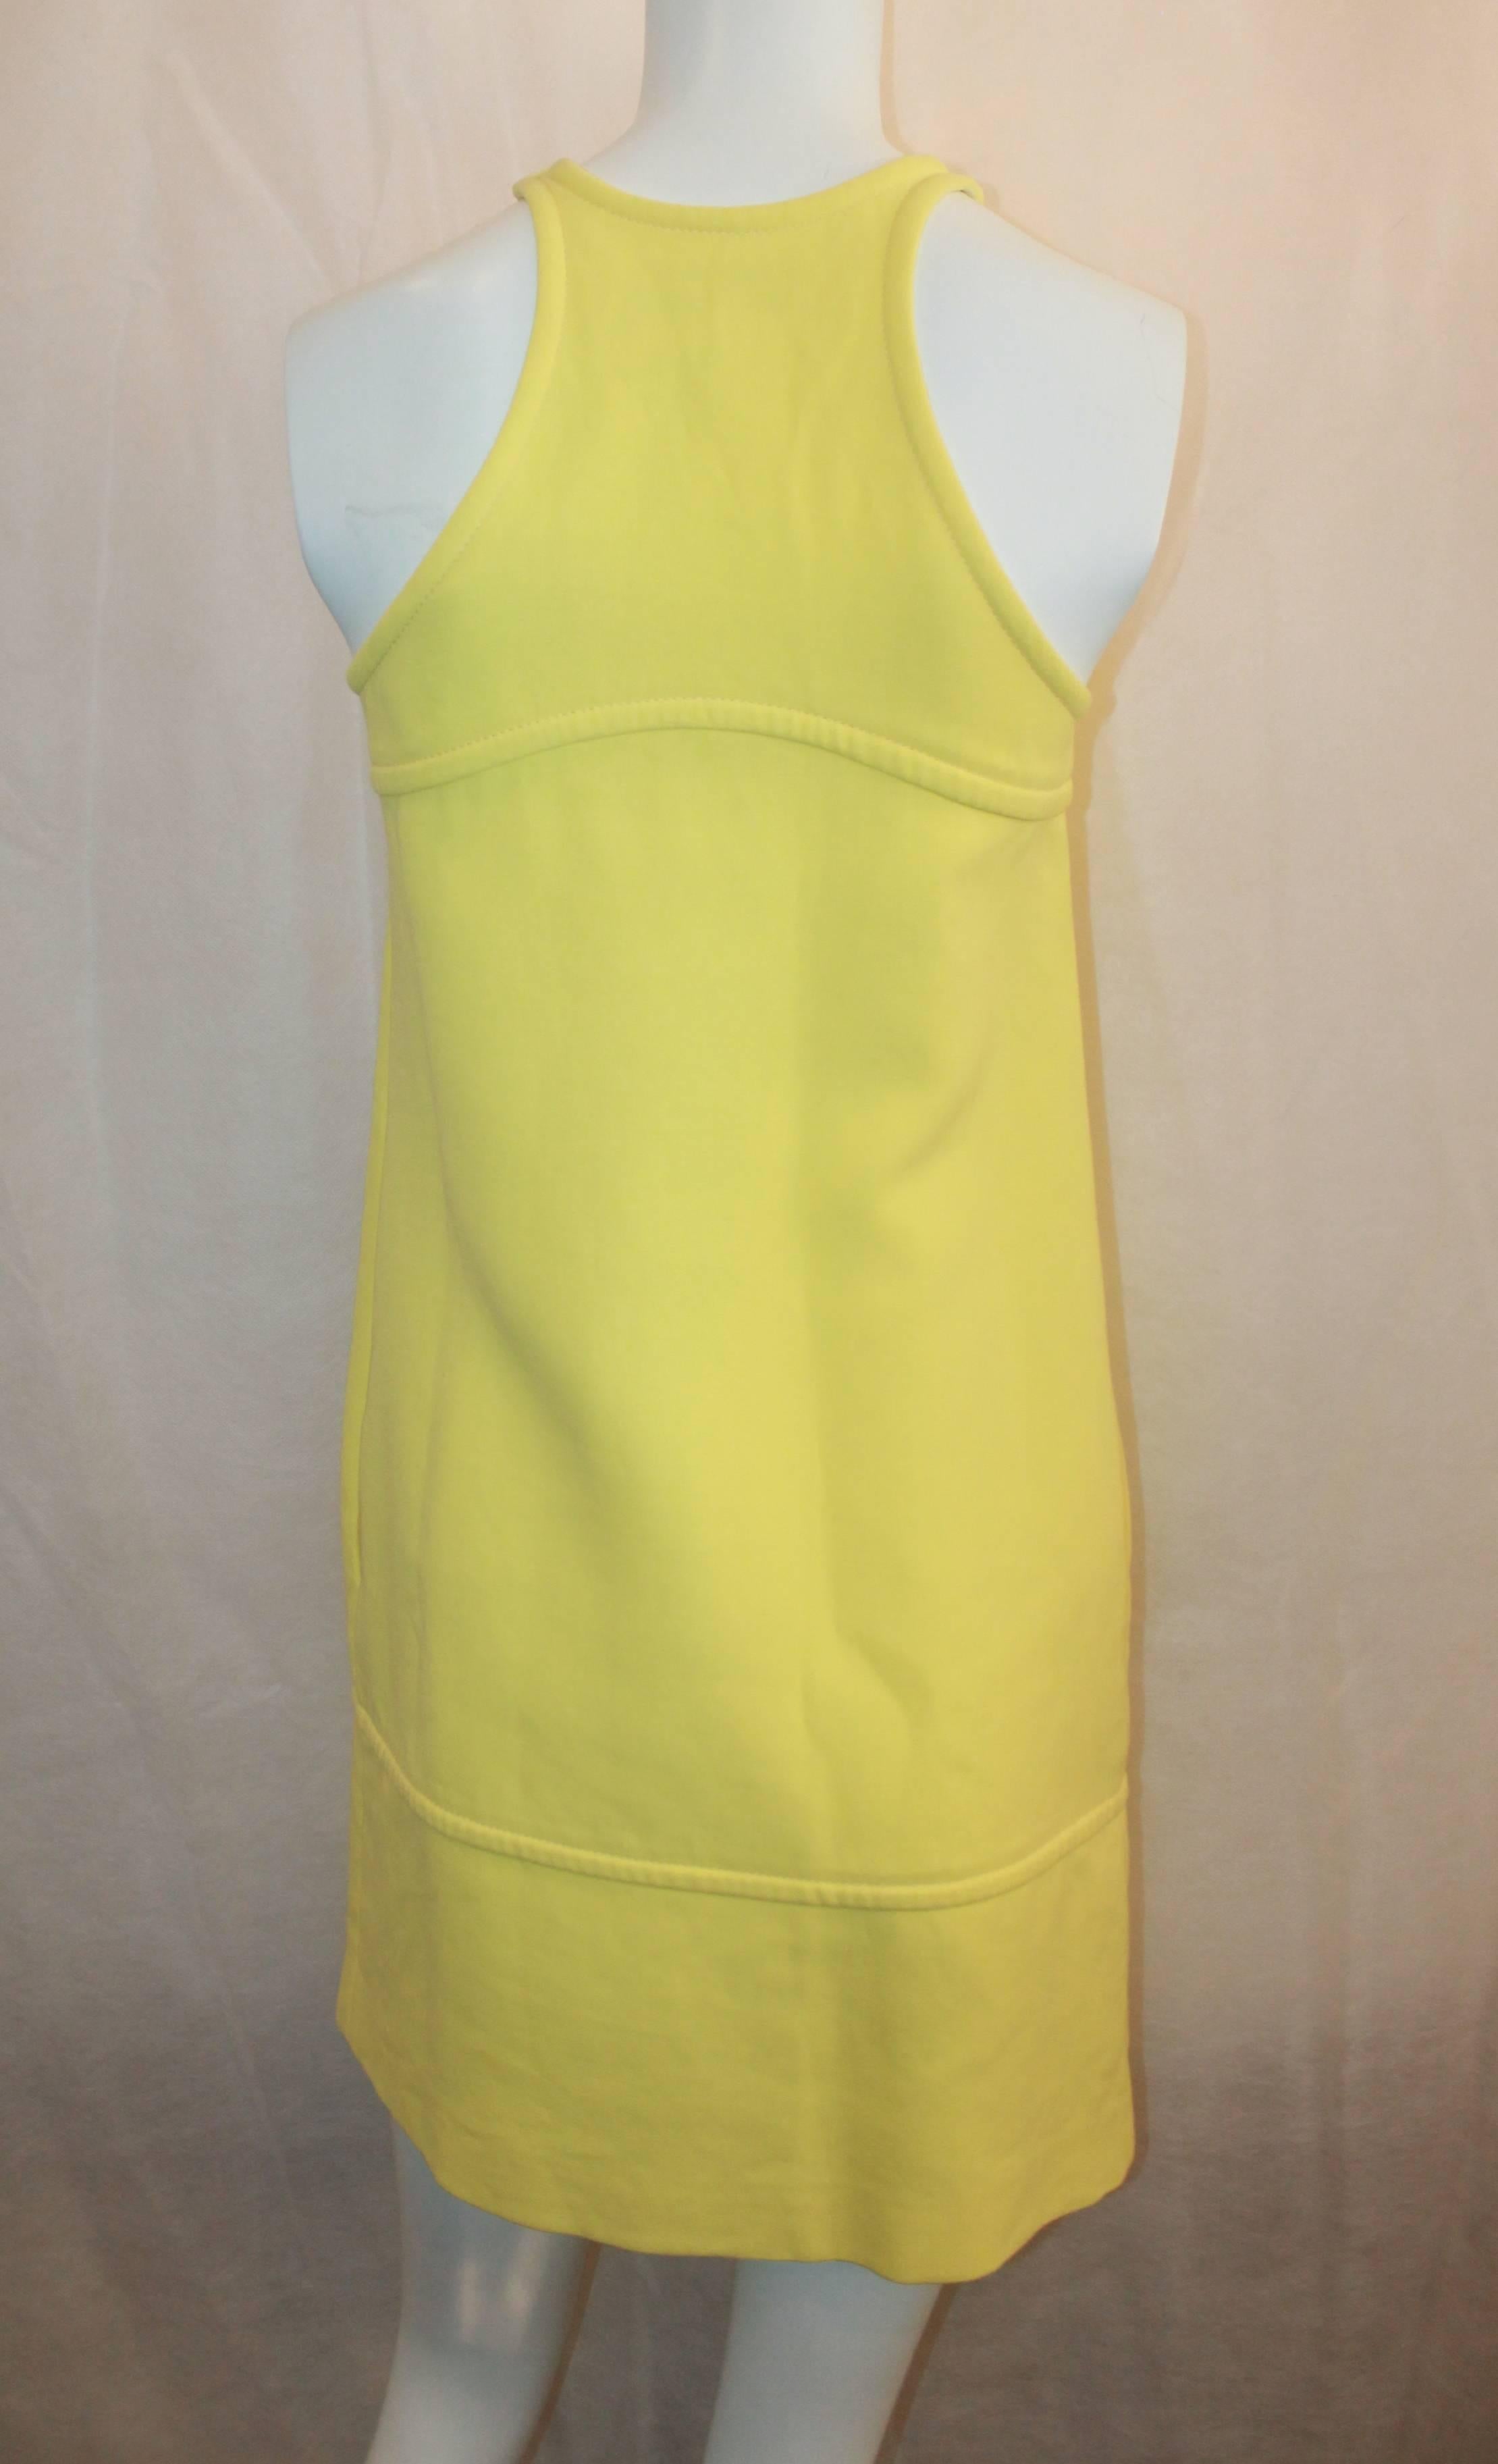 Women's Emilio Pucci New Yellow Halter Dress with Keyhole - 38